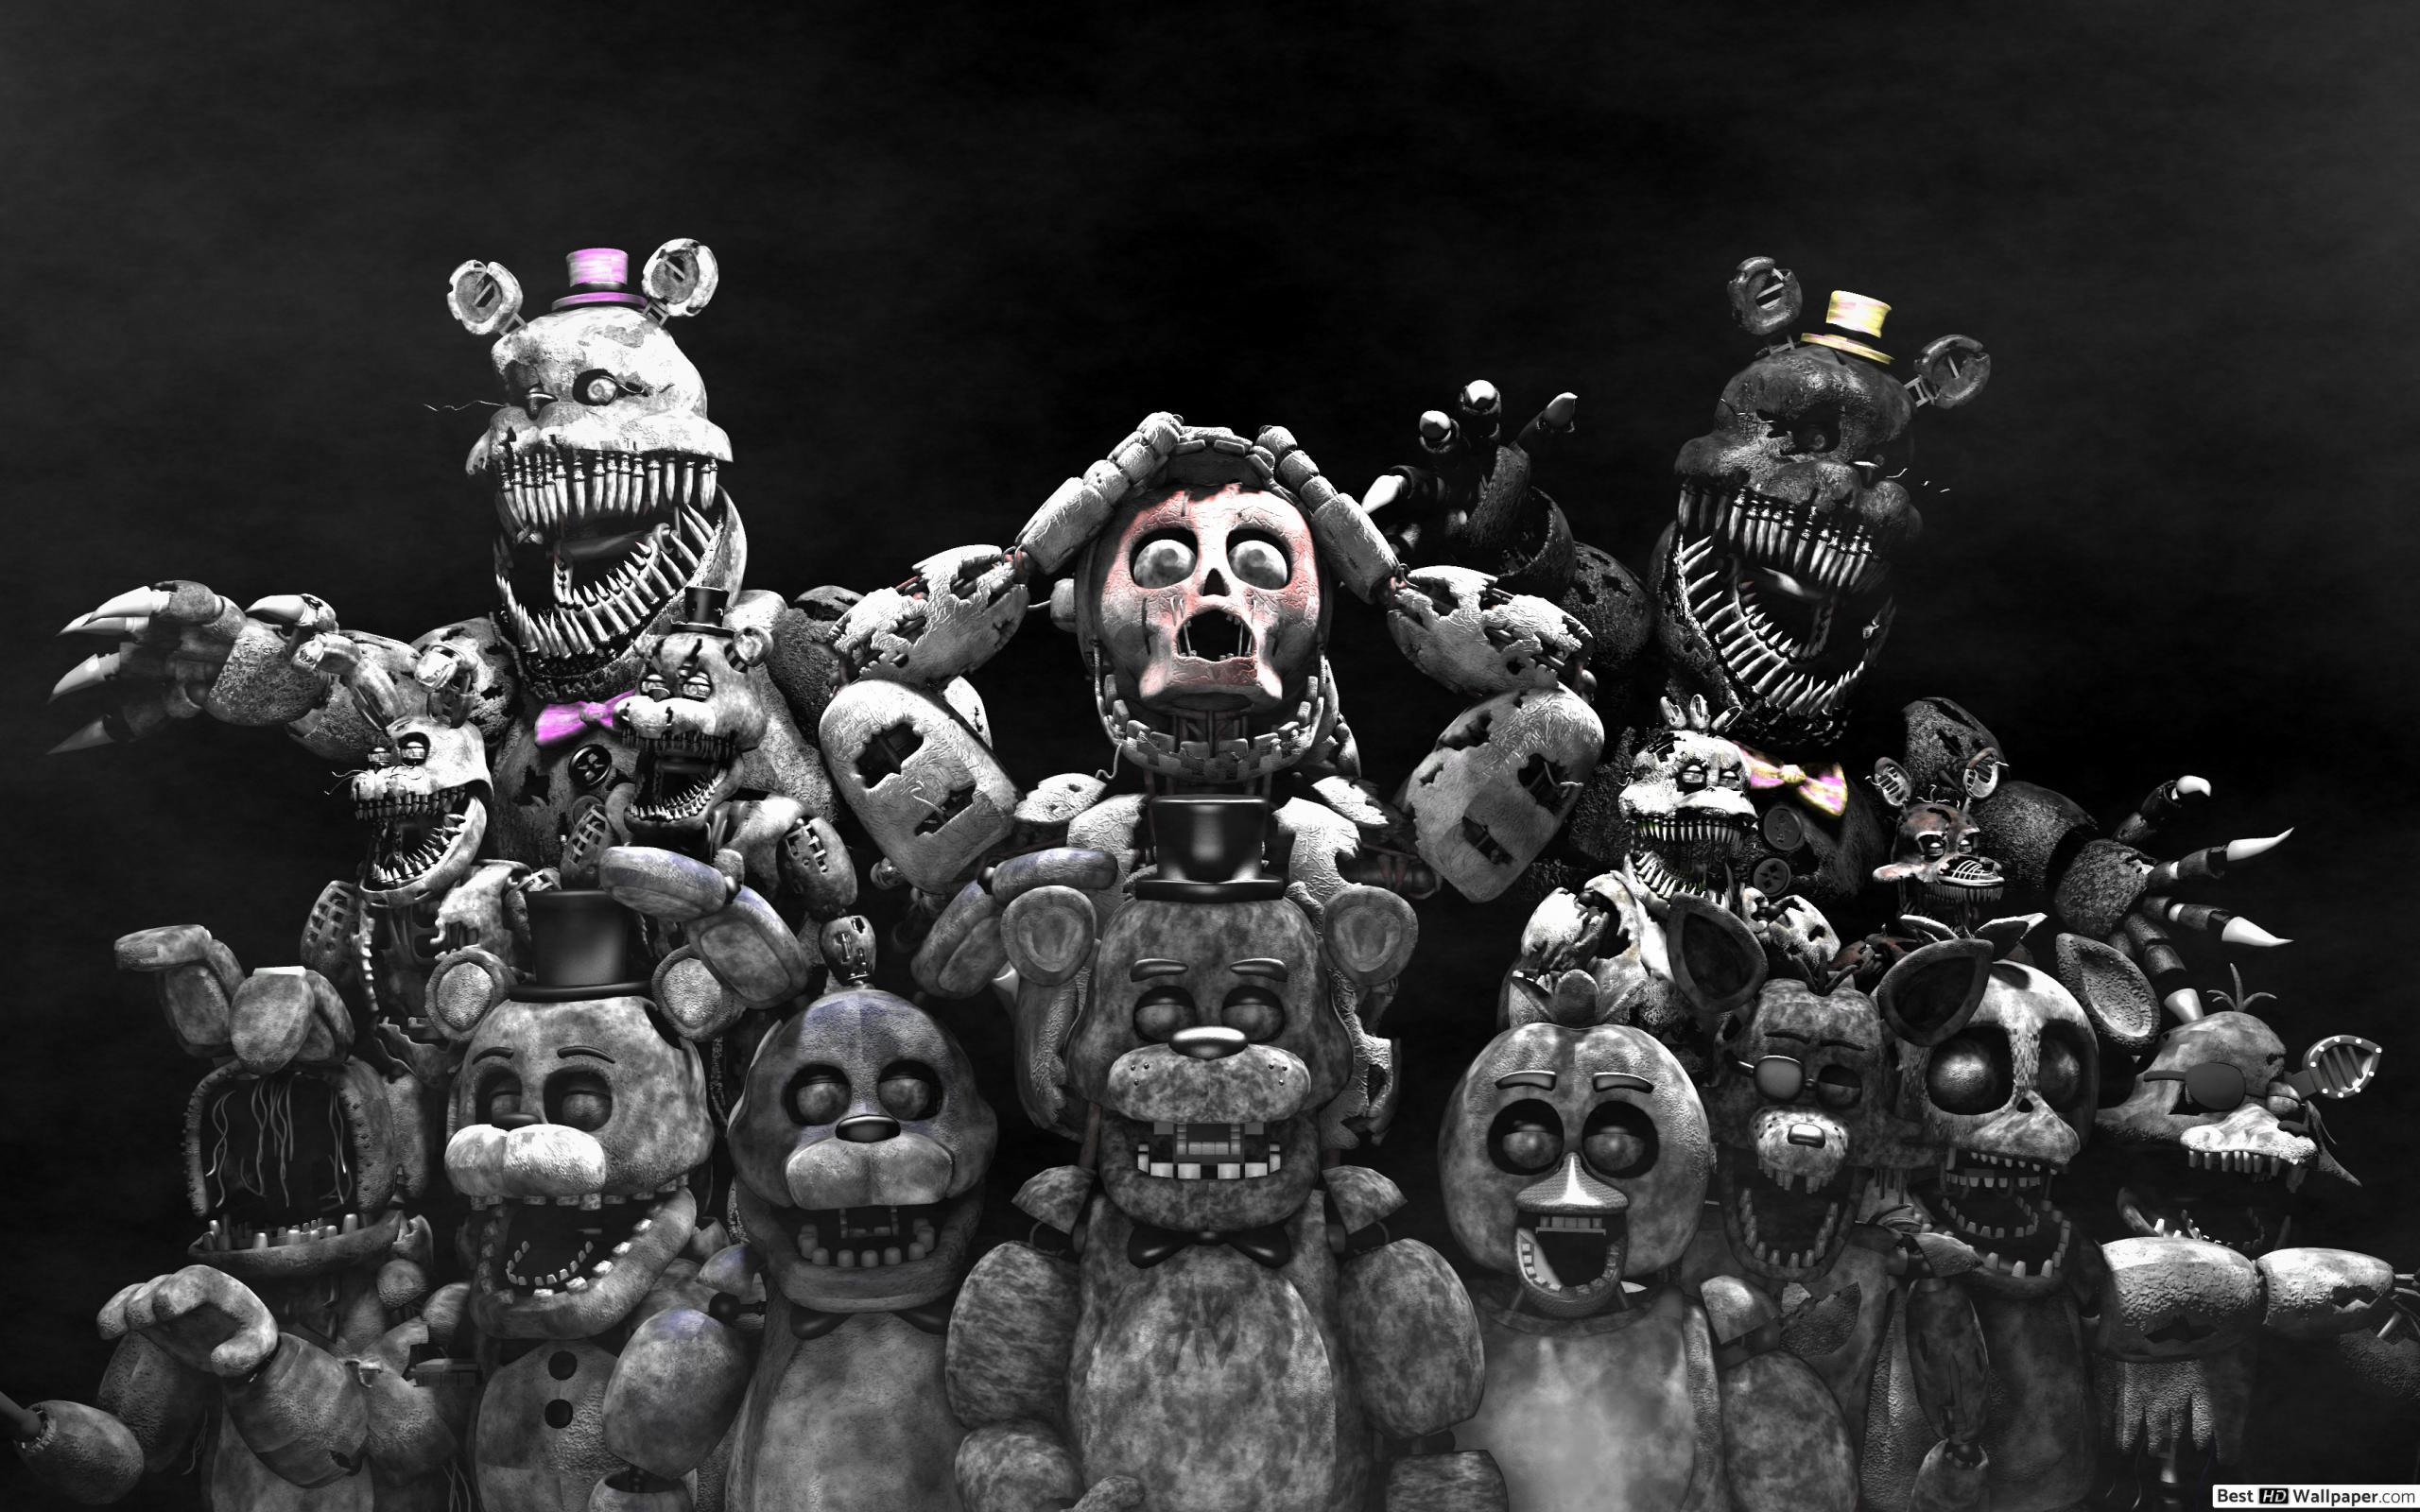 WallpapersWidecom  High Resolution Desktop Wallpapers tagged with fnaf   Page 1